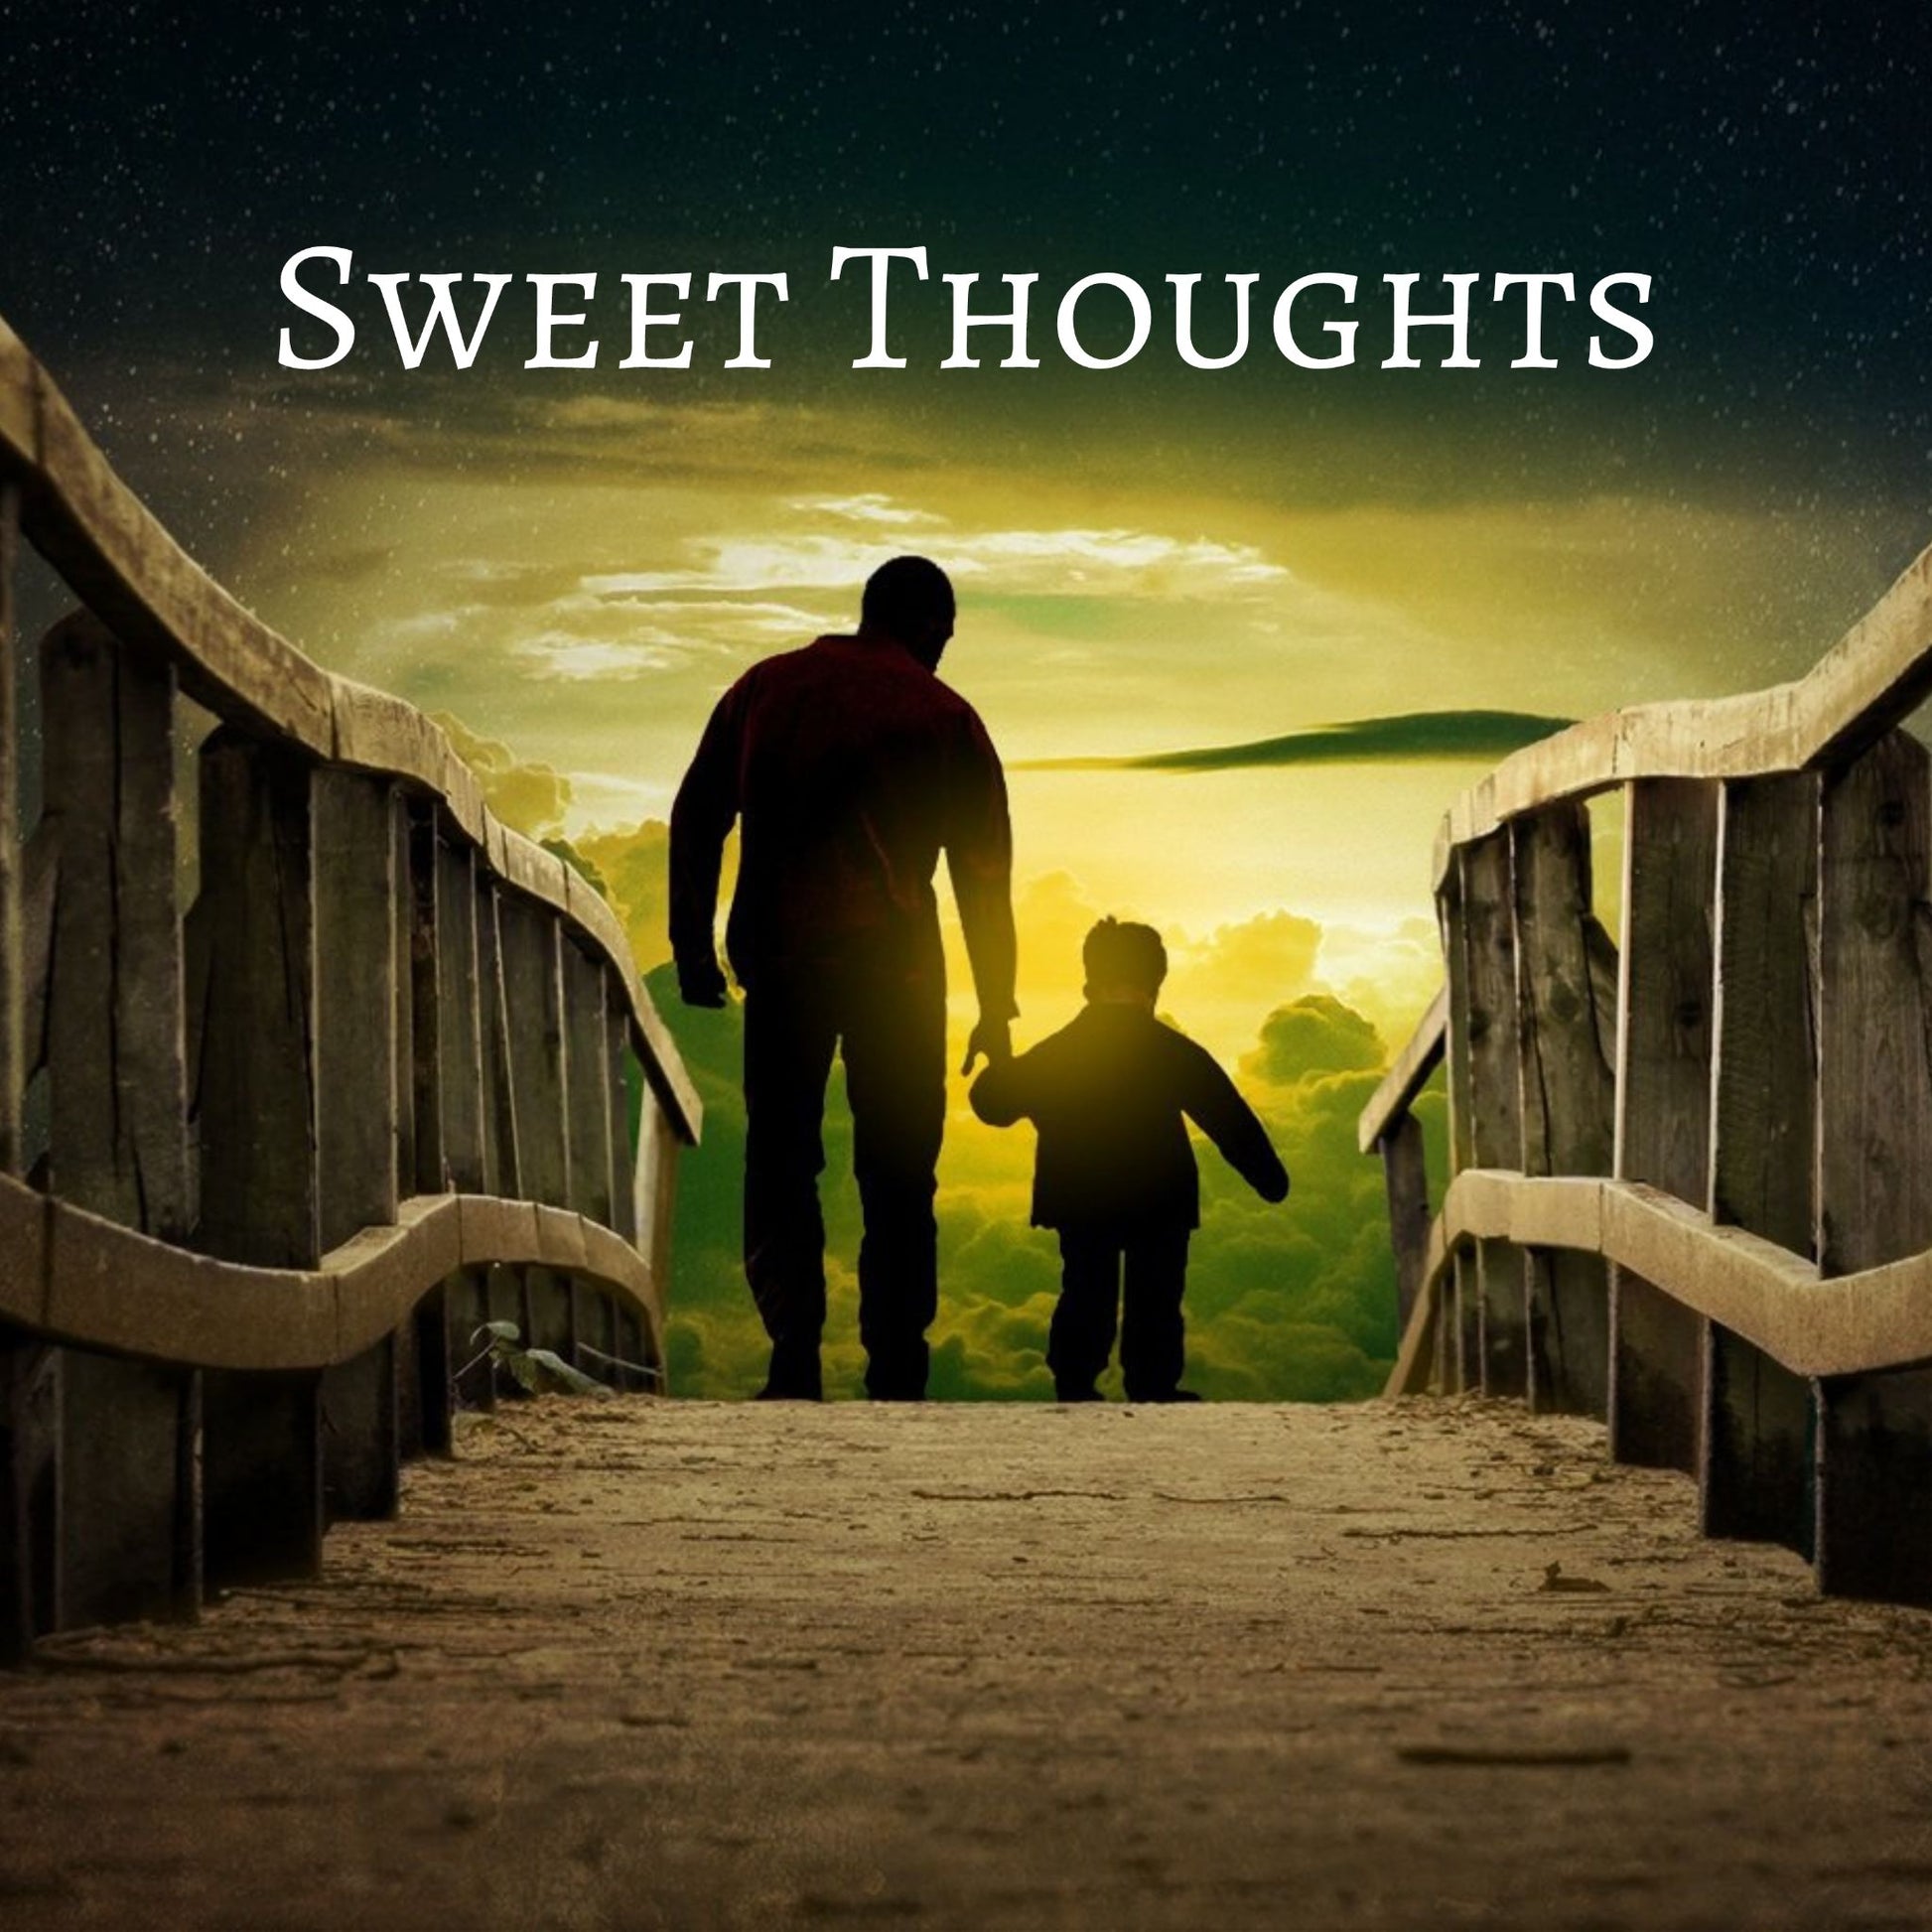 CD Cover of song Sweet Thoughts